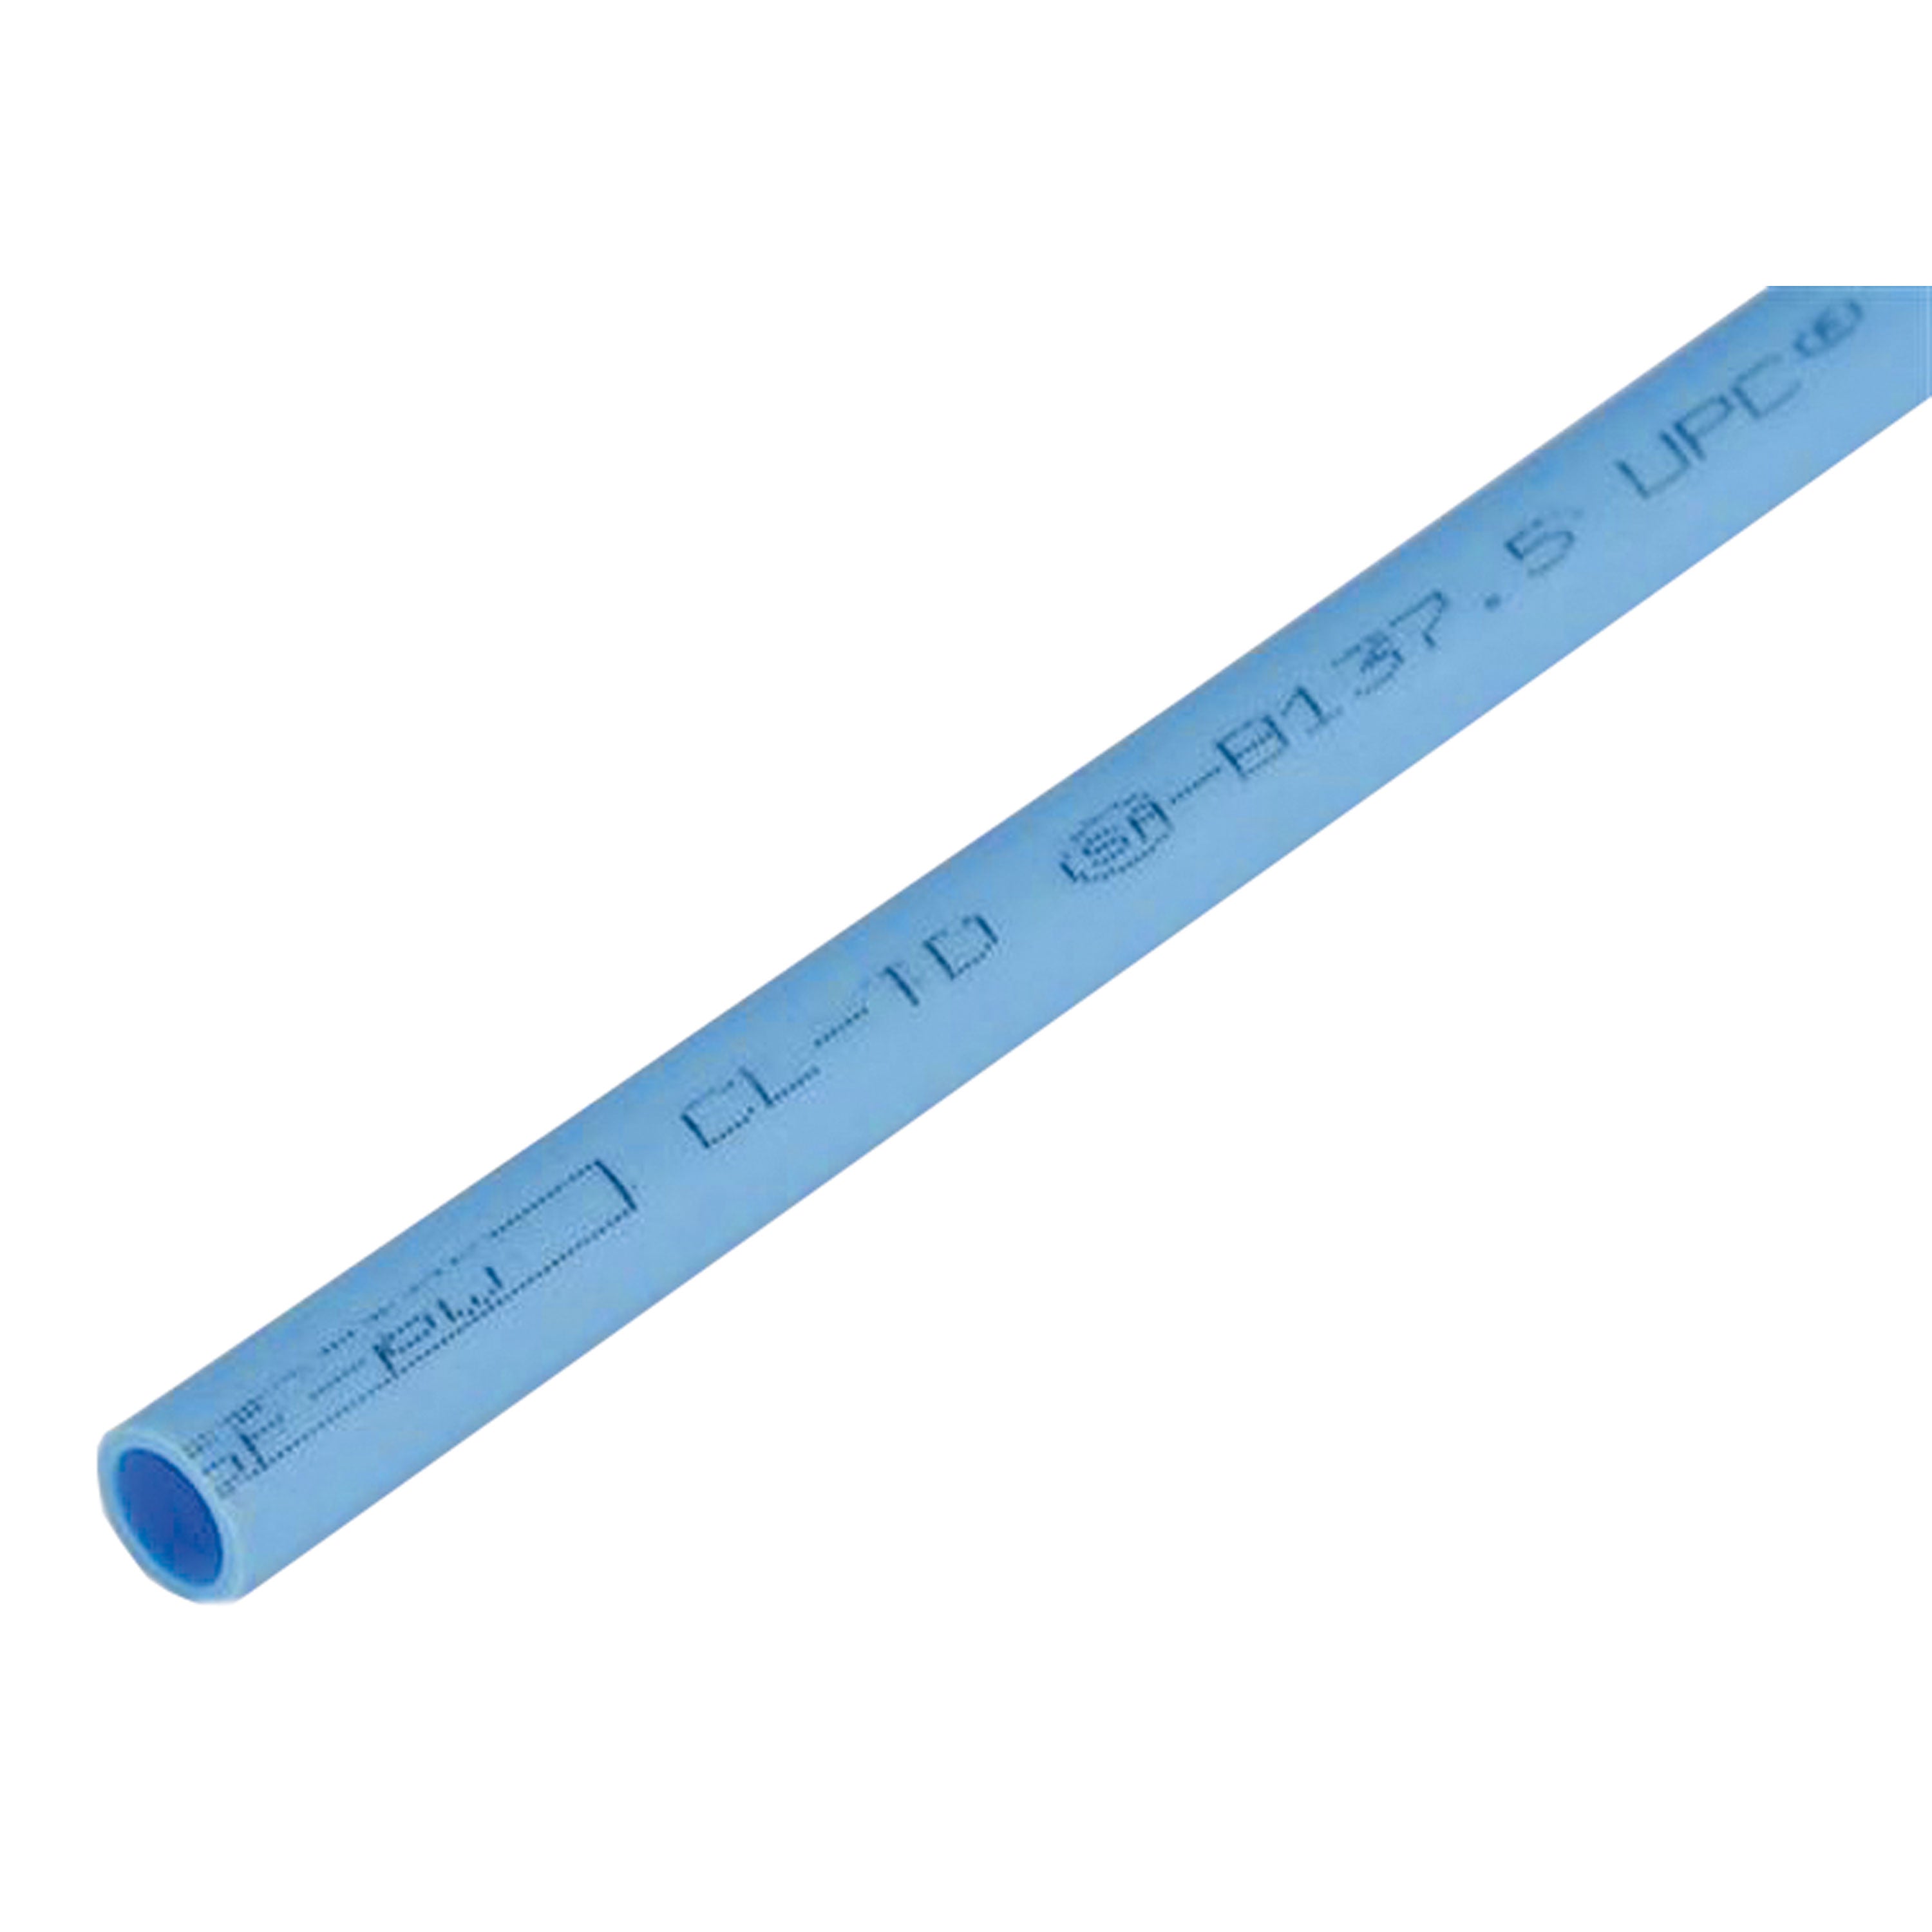 Flair-It 51282 BestPEX Color-Coded Tubing - 3/4" x 100', Blue